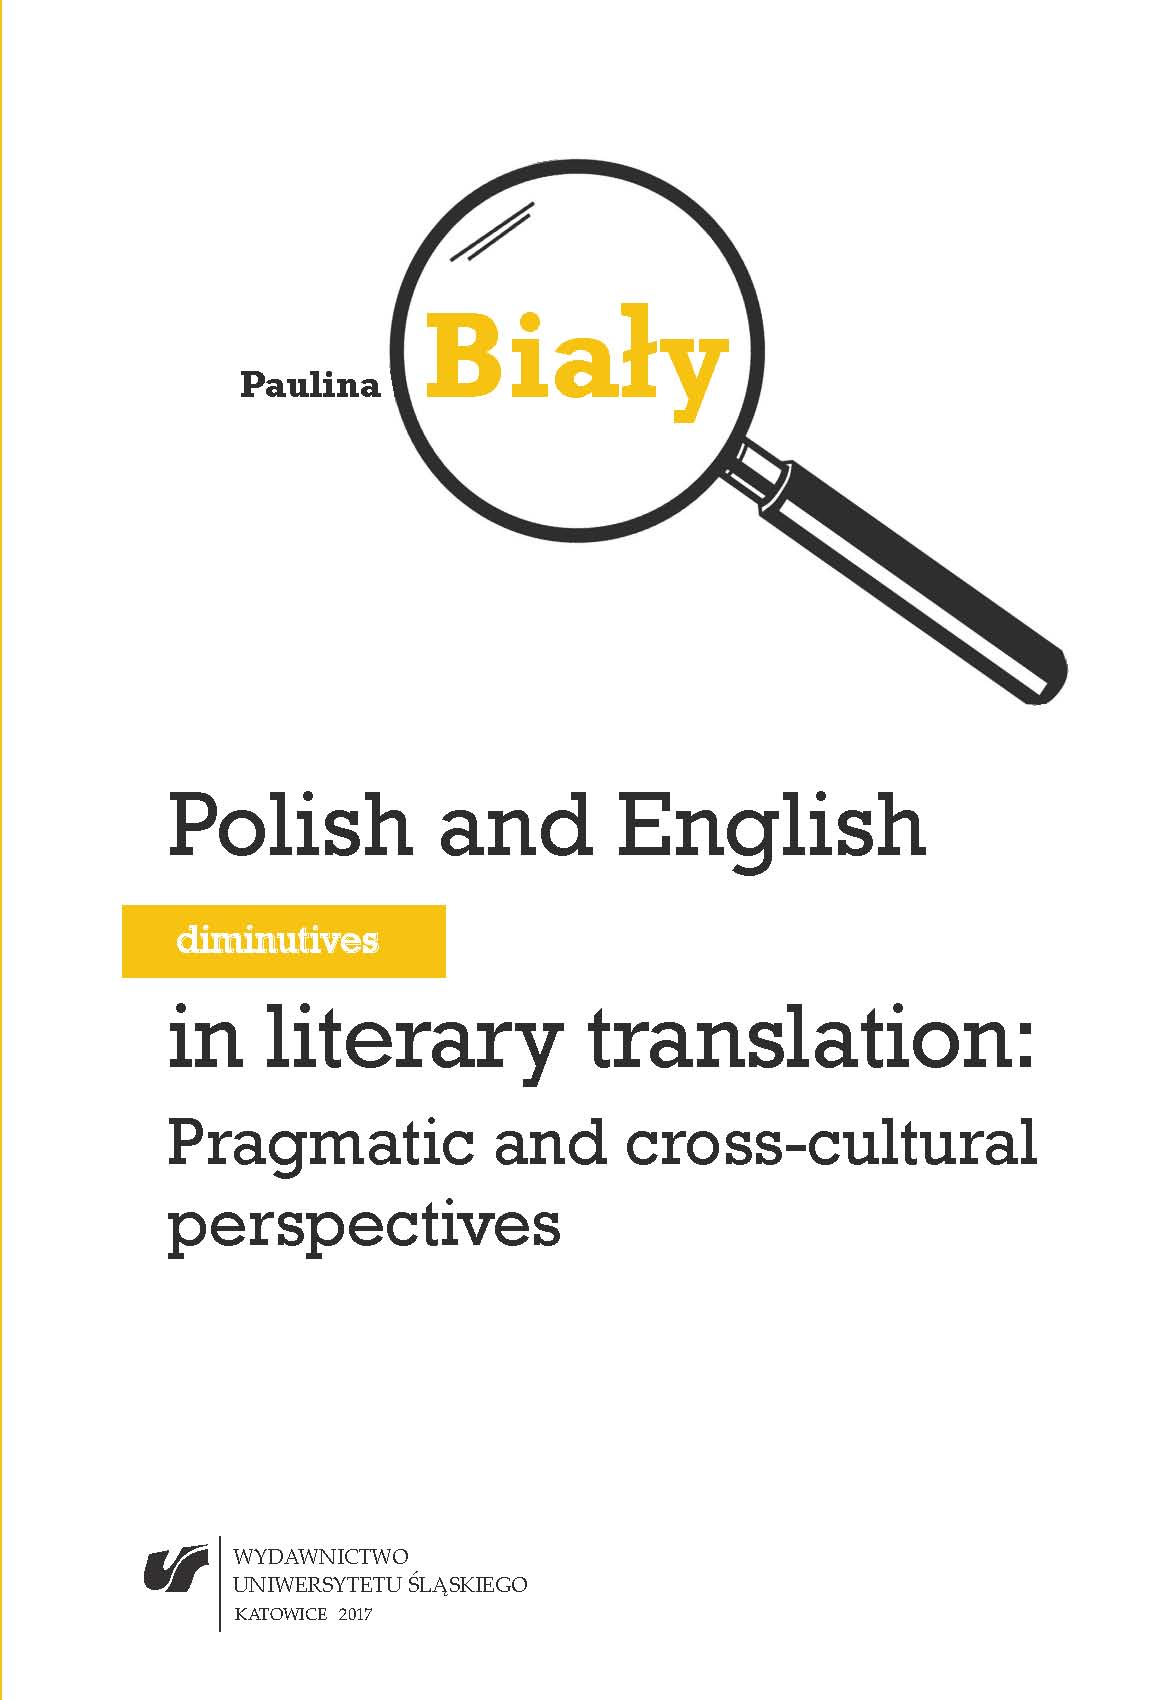 Polish and English diminutives in literary translation: Pragmatic and cross-cultural perspectives Cover Image